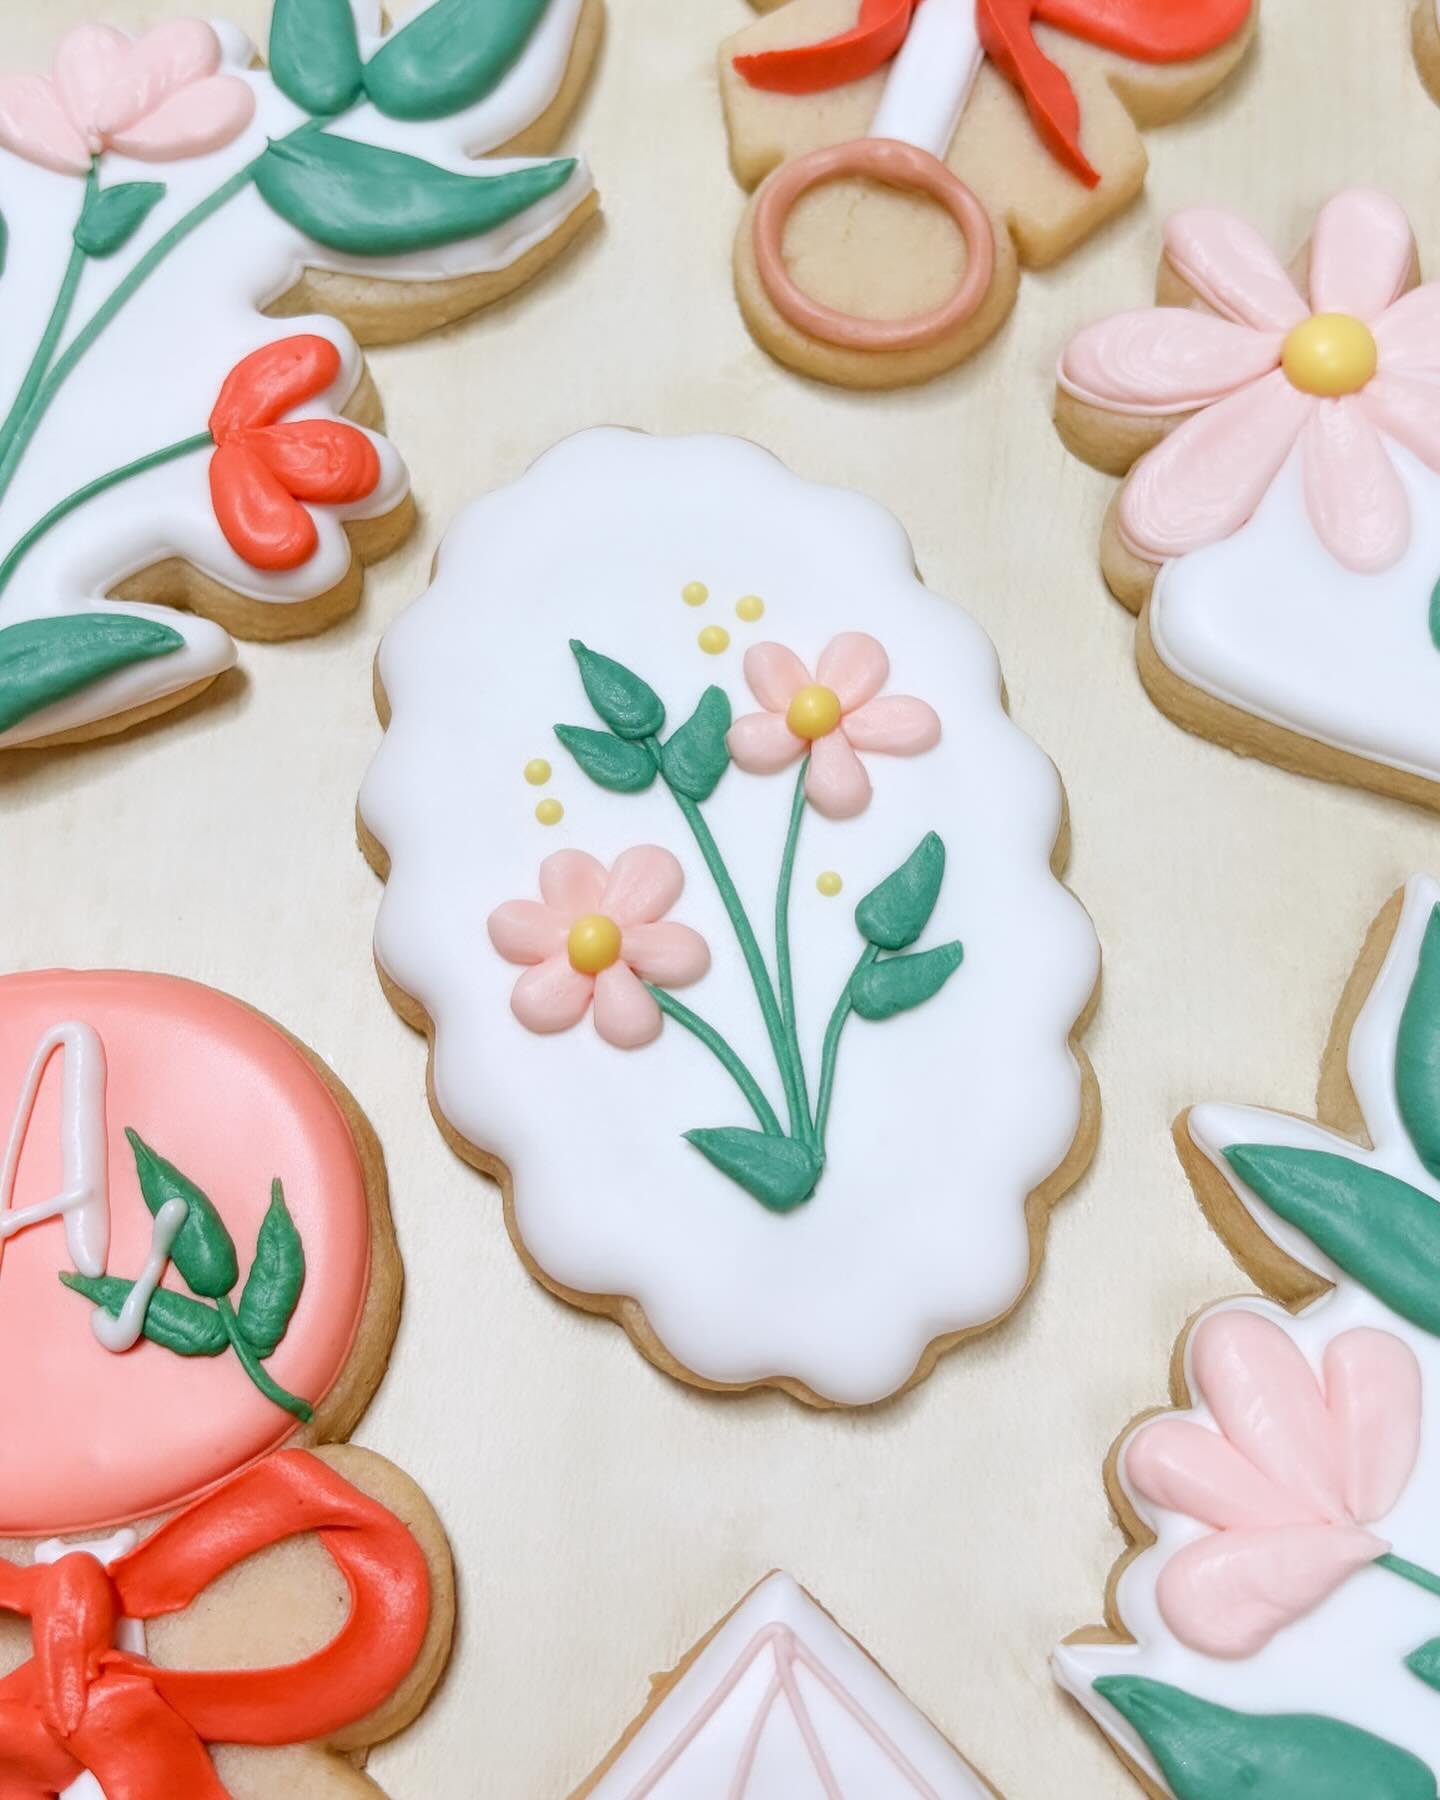 sweet set a la @sarabeecookie 🌼

sending off these cookies for a baby shower this weekend, I&rsquo;m gonna miss them!!! 

🫶 I&rsquo;m so grateful for the recent custom orders I&rsquo;ve received, it&rsquo;s so fun to have these back on my schedule!